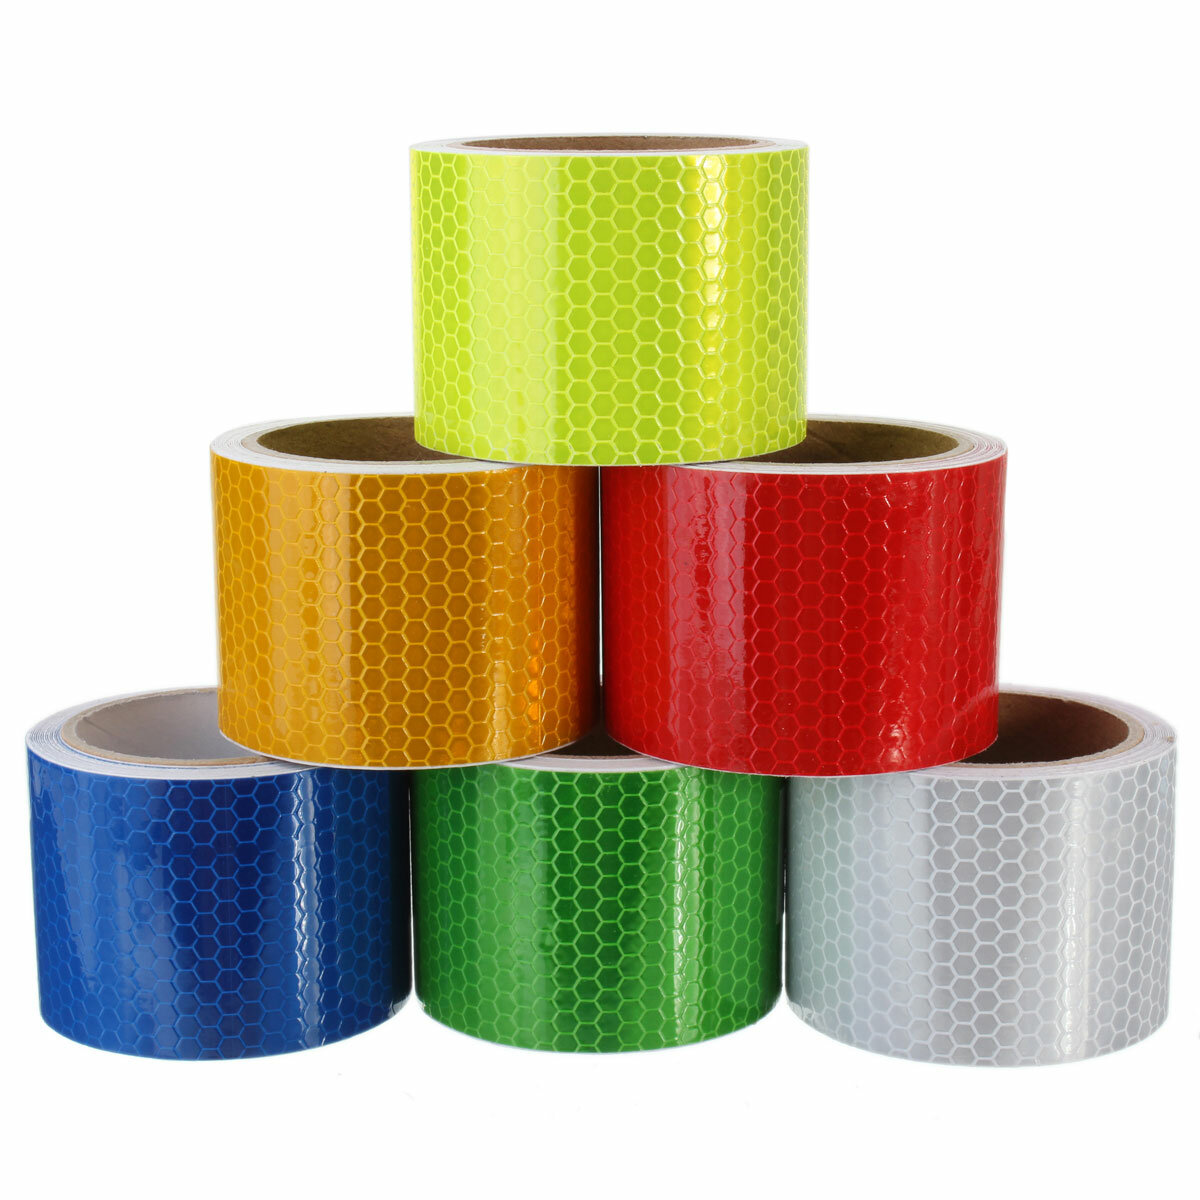 Safety Caution Reflective Tape Warning Tape Sticker Self Adhesive Tape 5cm AL 